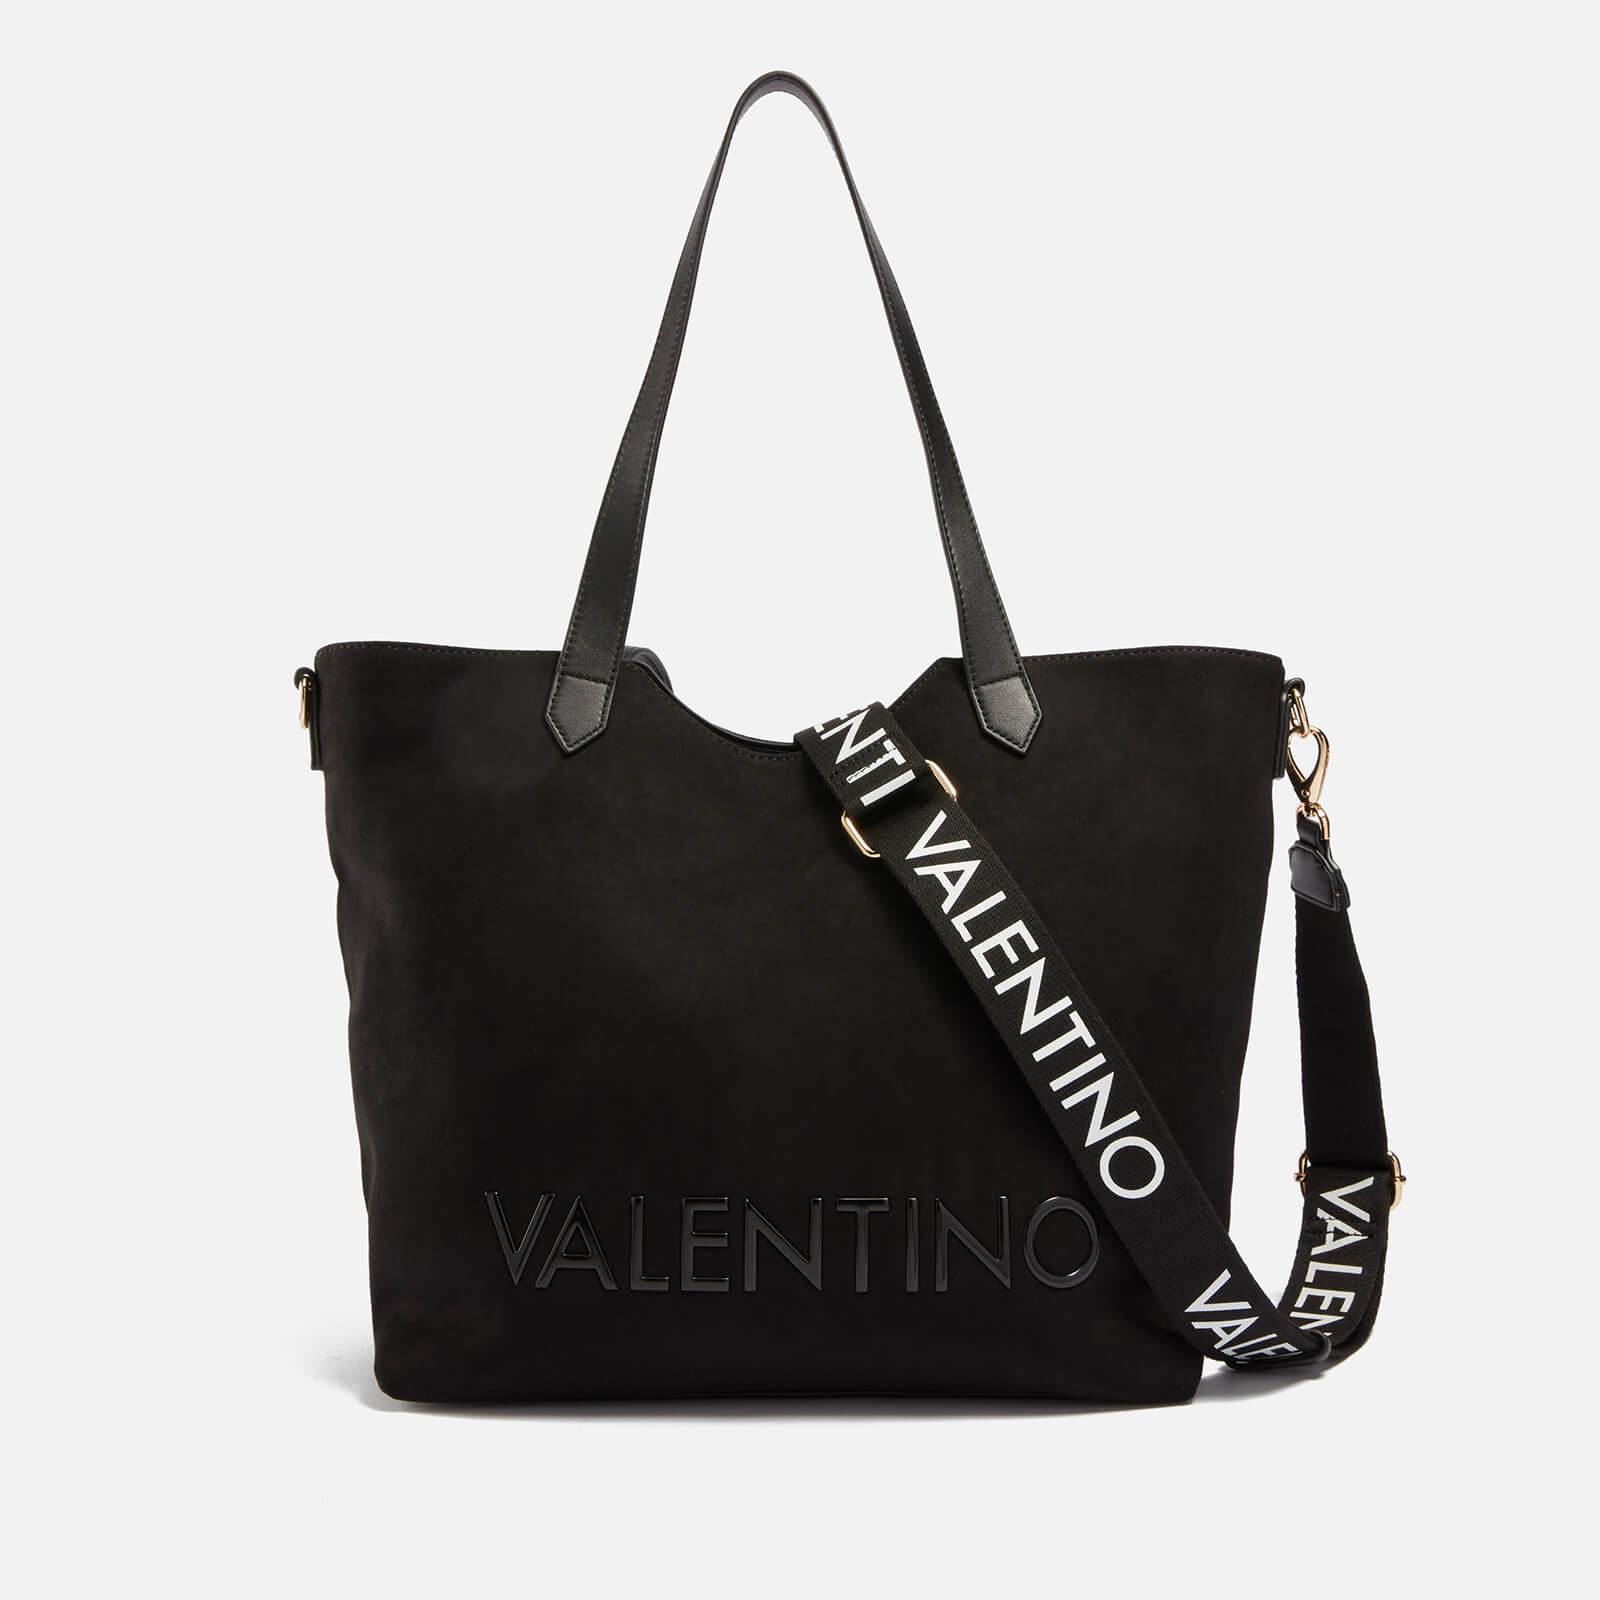 Valentino Courmayeur Faux Suede Tote Bag product